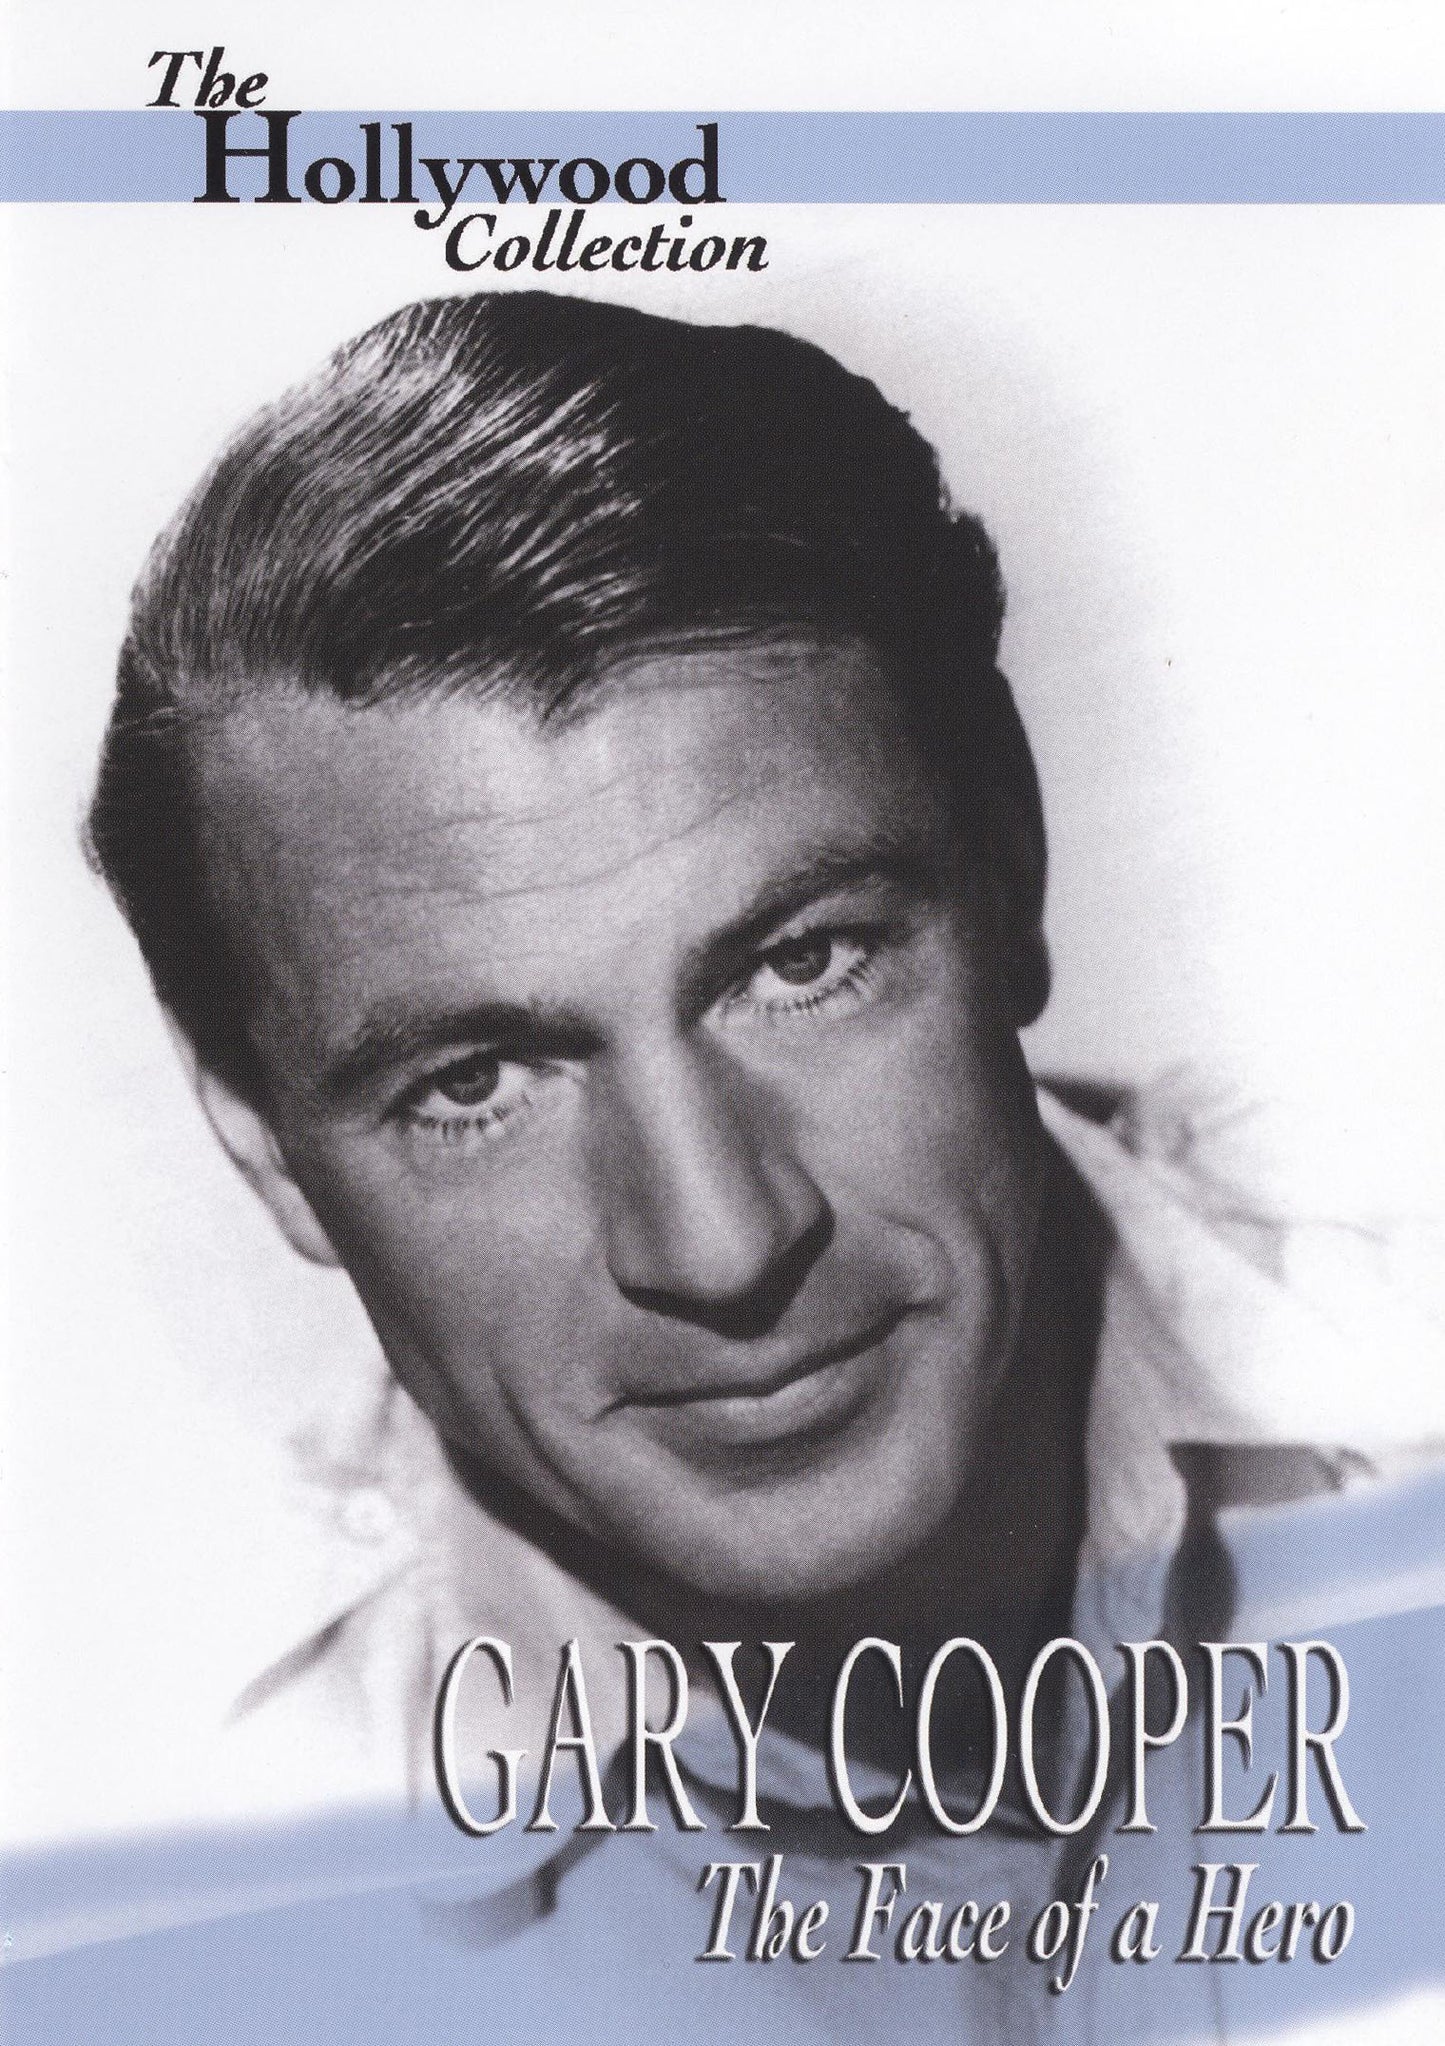 Hollywood Collection: Gary Cooper - The Face of a Hero cover art